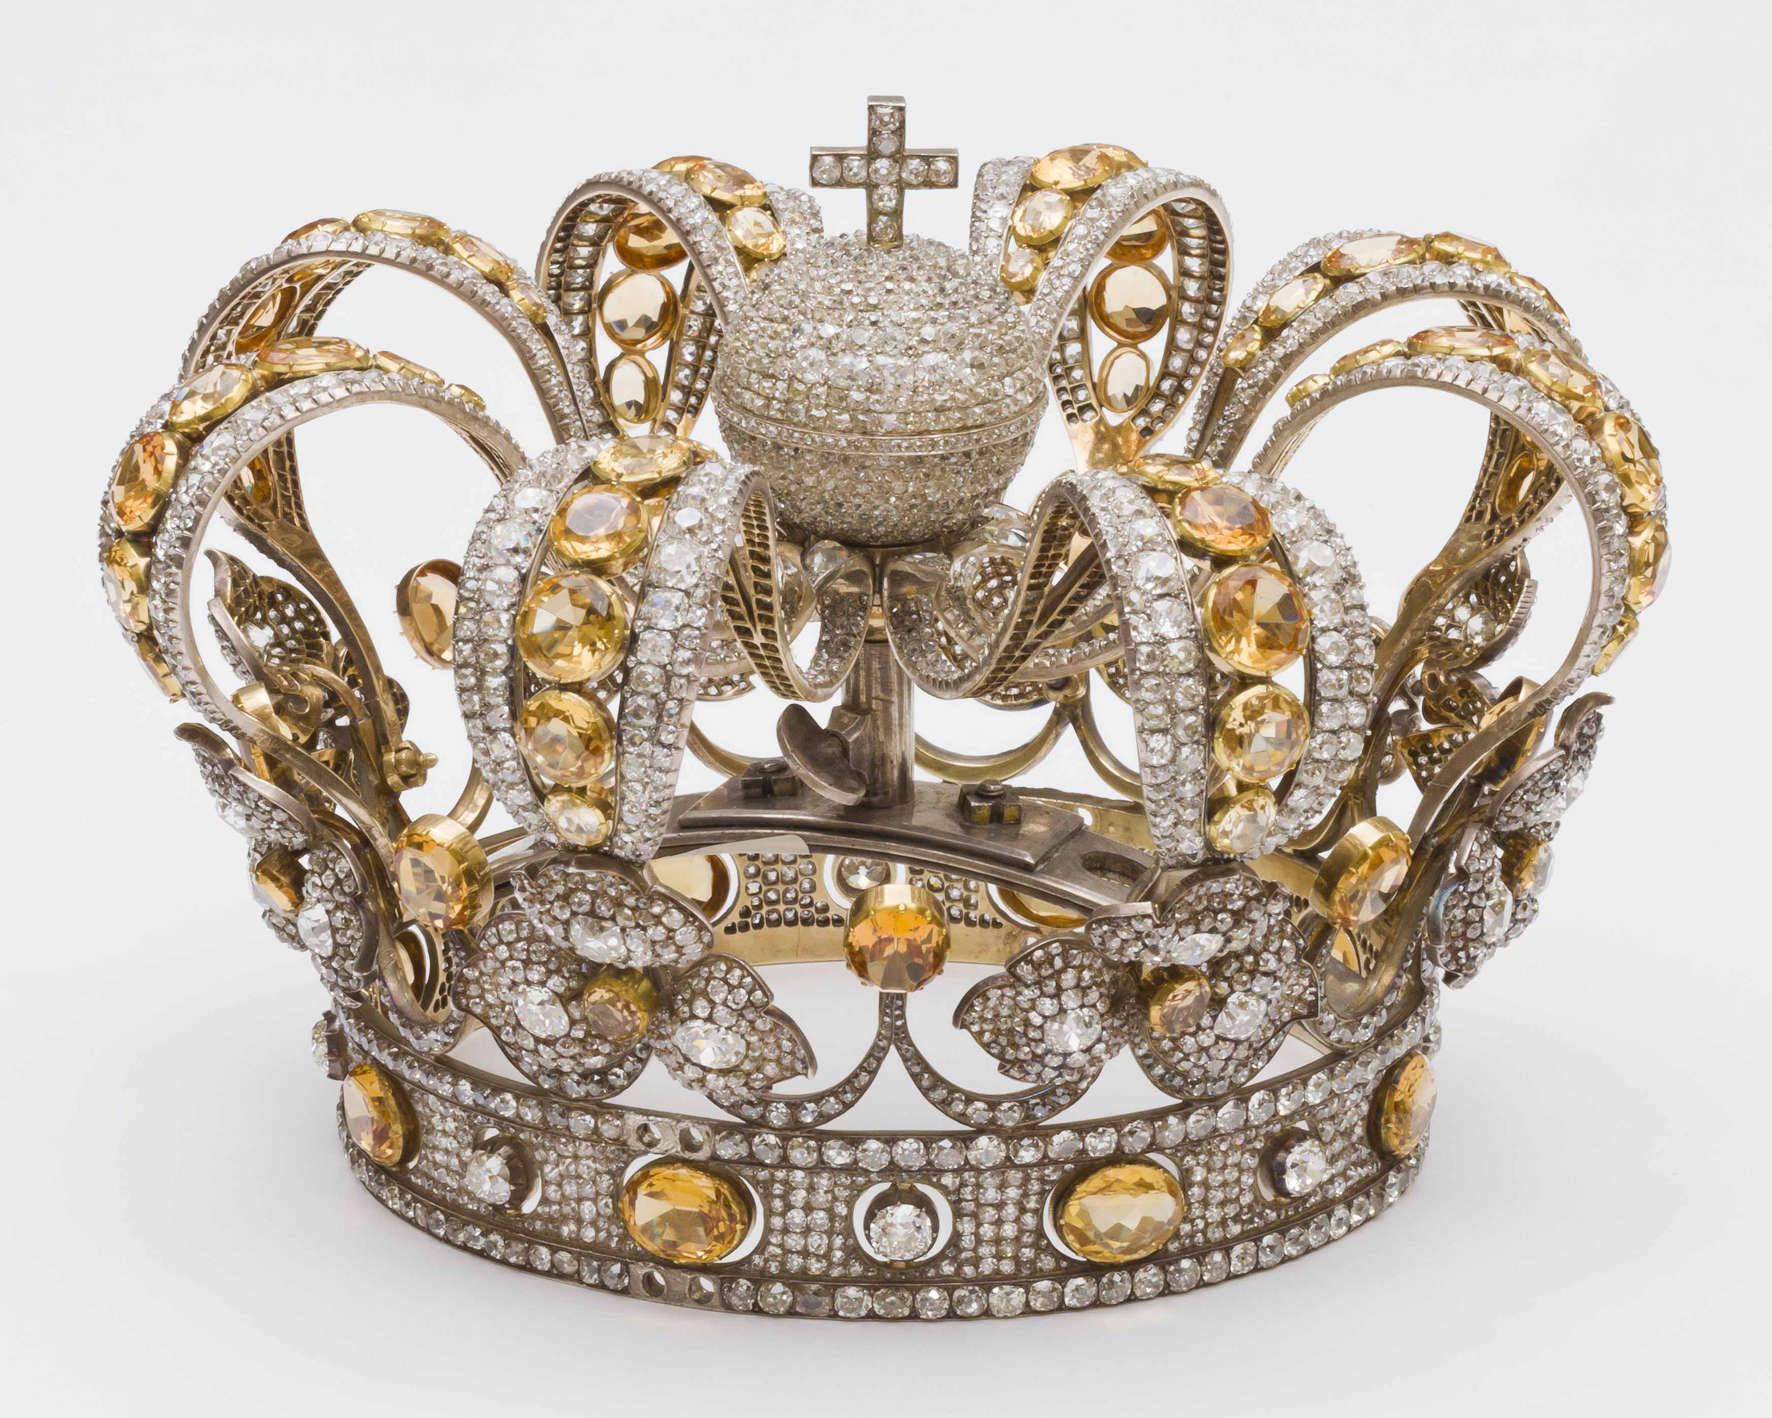 Narciso Práxedes Soria, Crown of the Virgin of Atocha (1852; silver, diamonds, topazes, 16 x 14 cm; Madrid, Royal Collections Gallery)